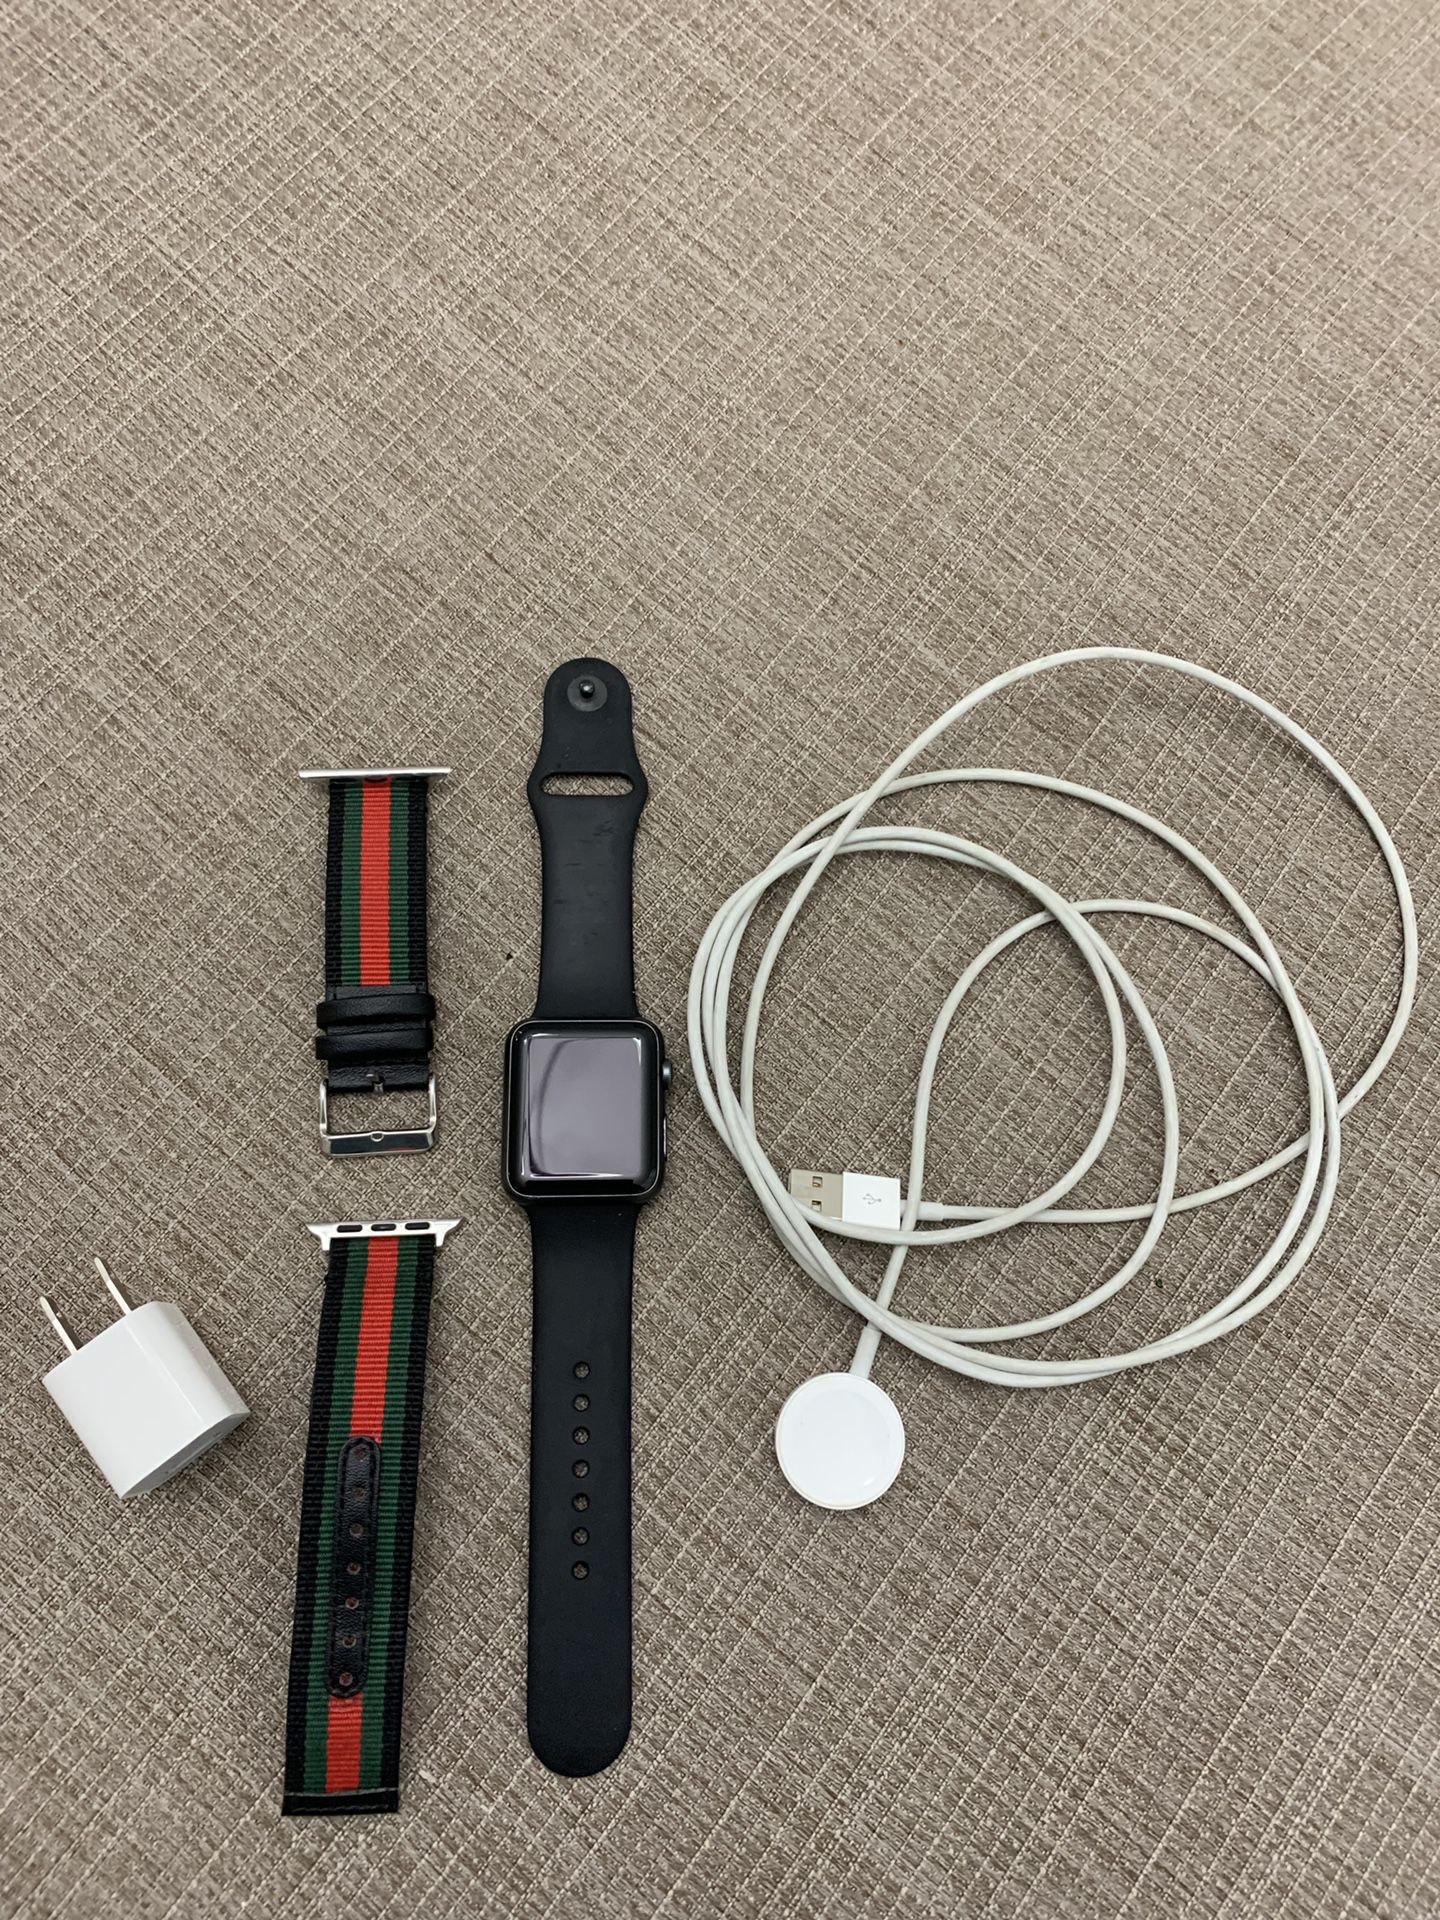 Apple Watch series 1 with 2 bands and charger.